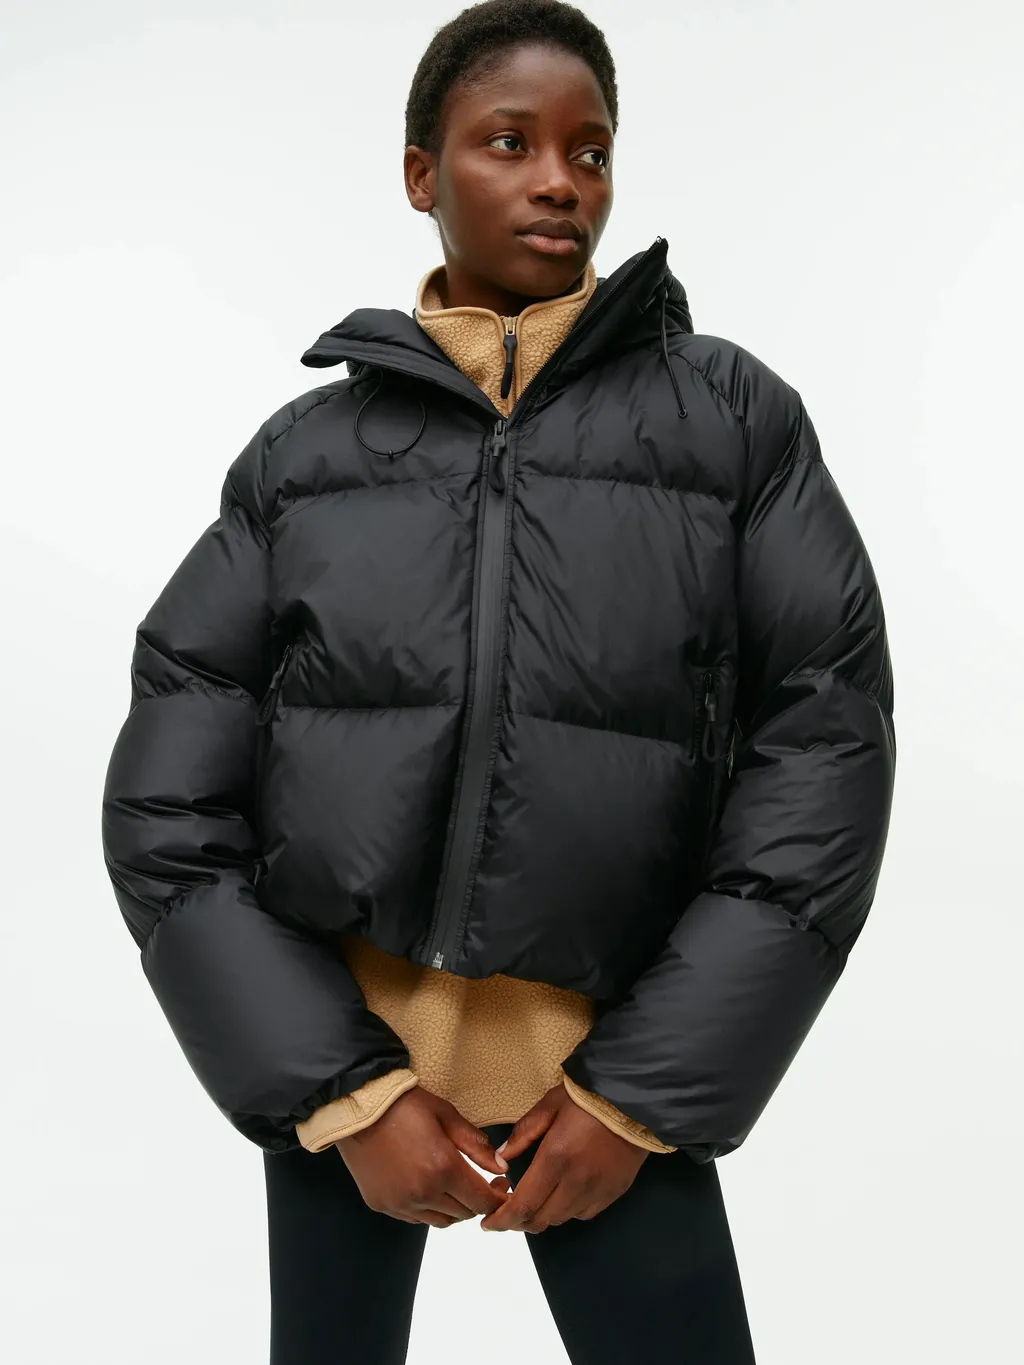 a model wearing a puffer jacket for cold weather outfits